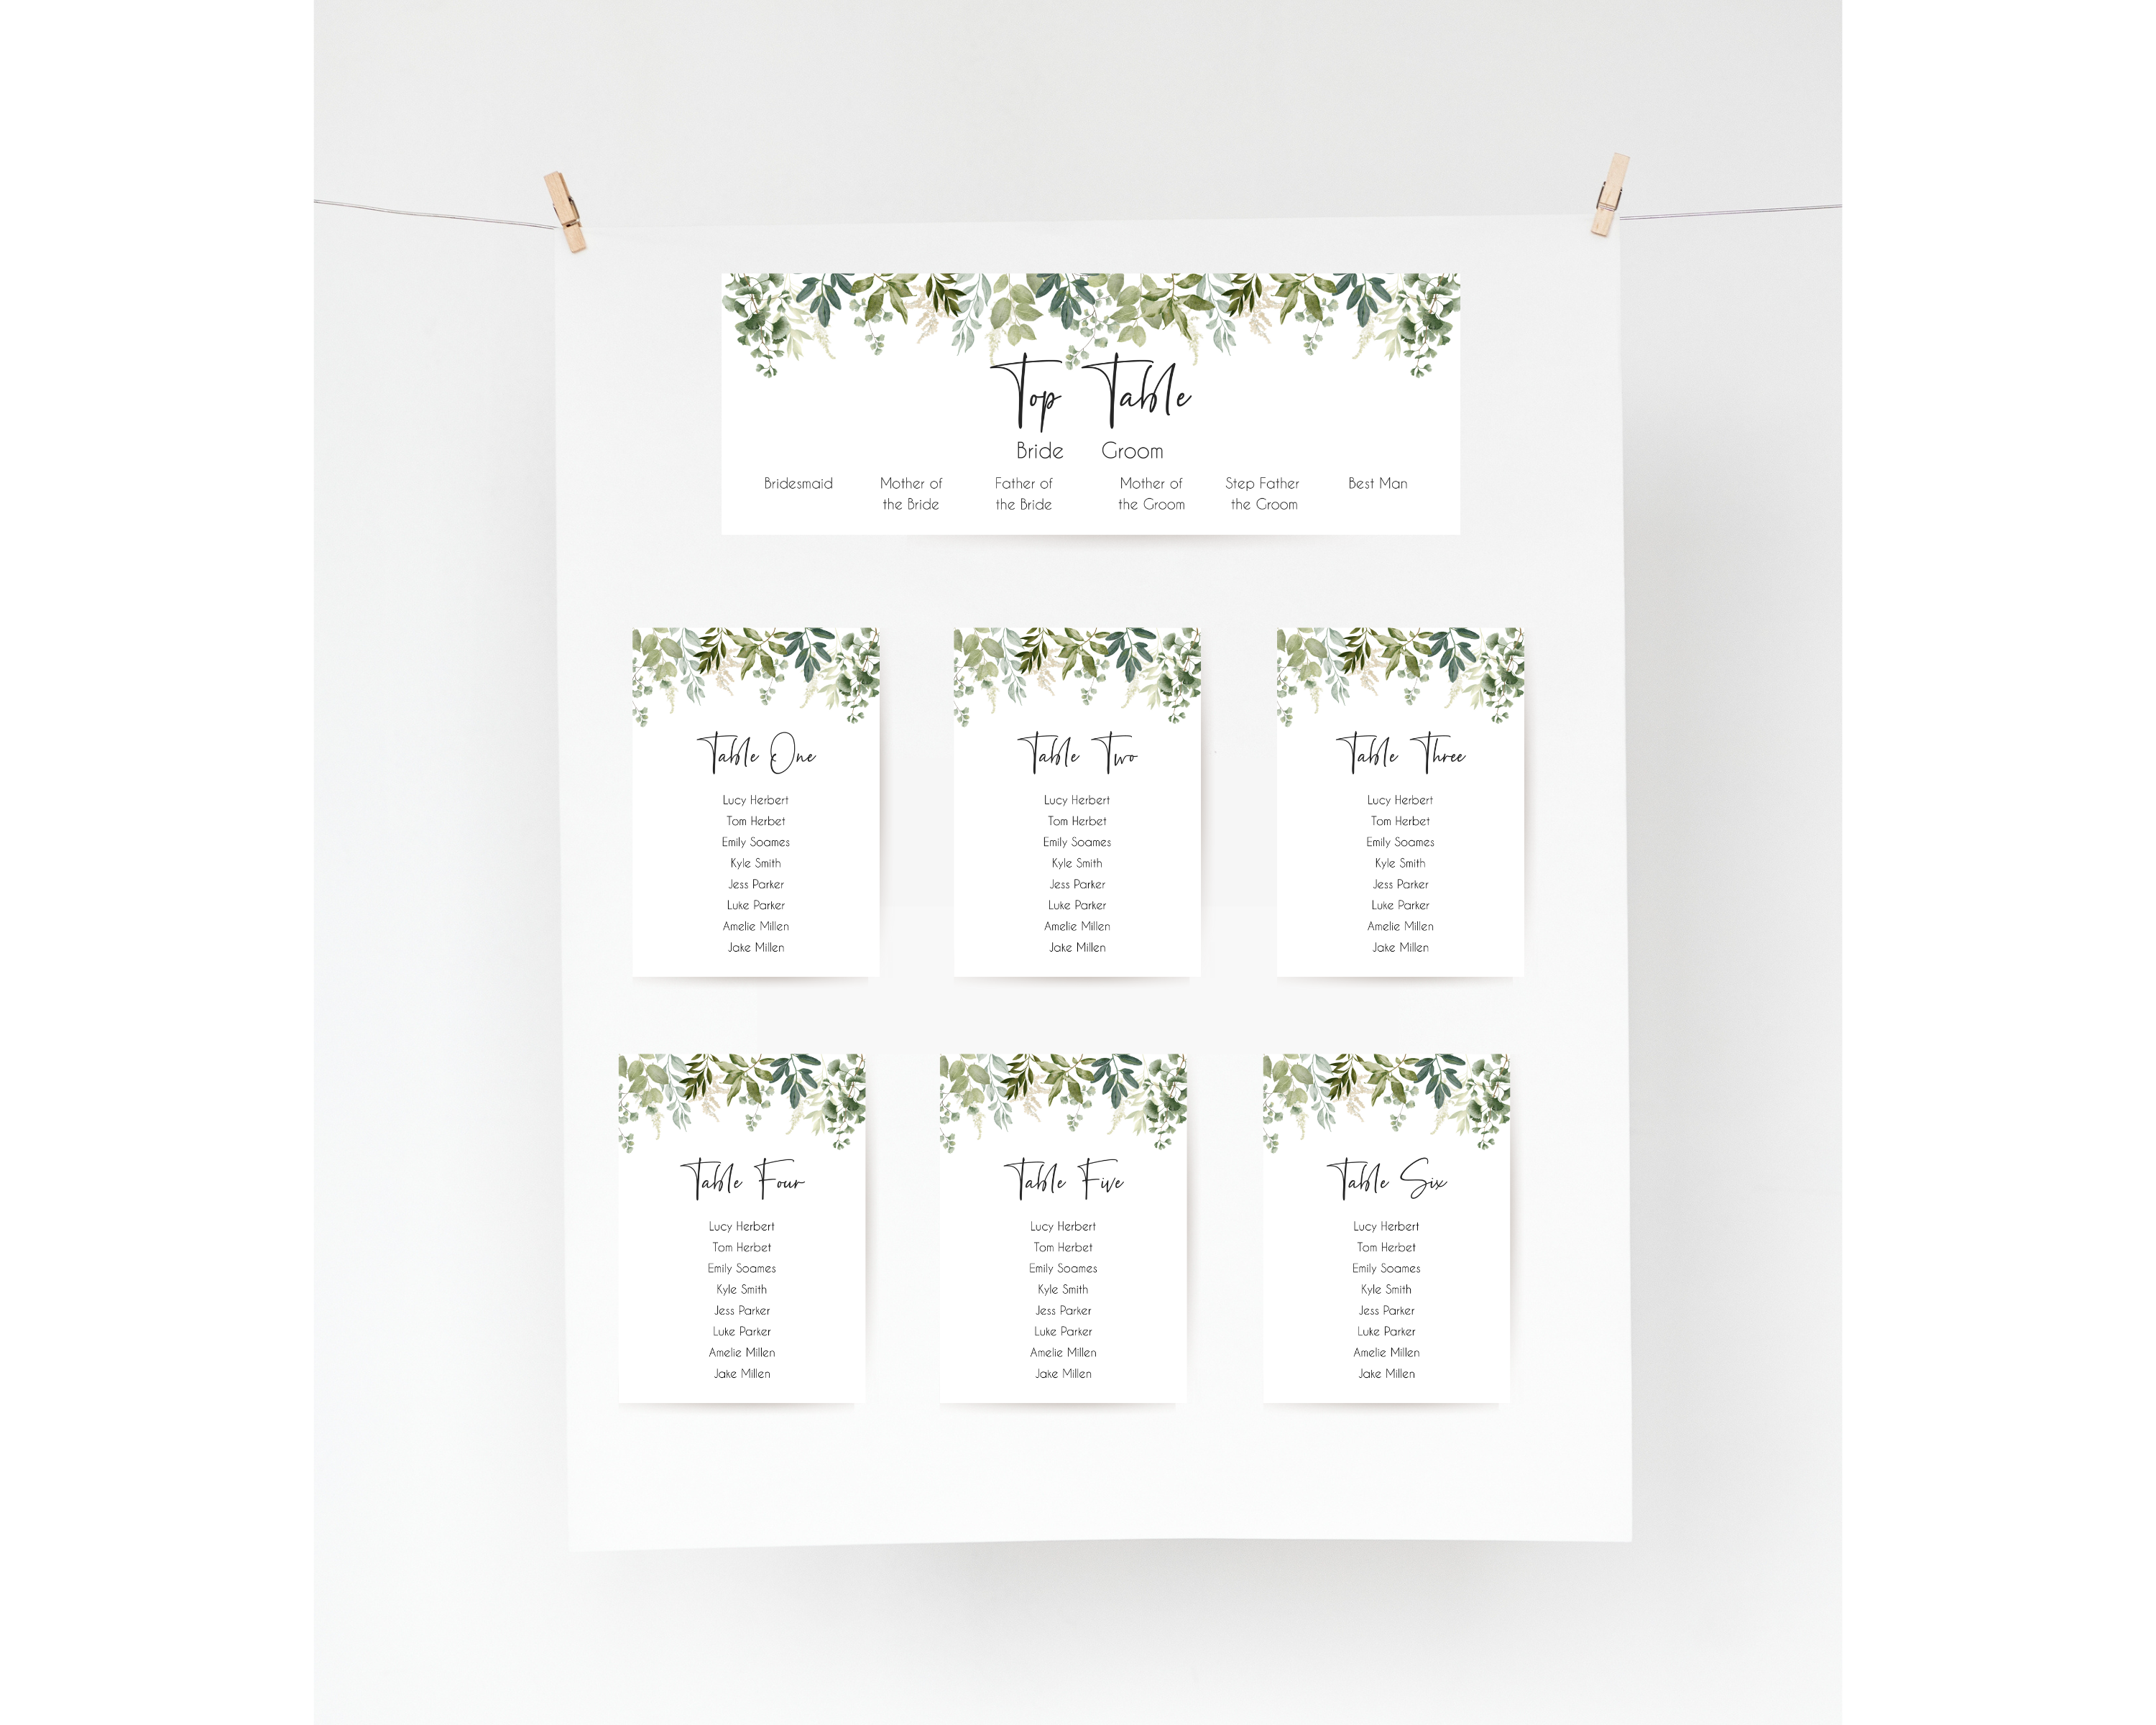 A set of Poppleberry greenery & eucalyptus wedding table plan cards, including 'top table' and 'A6 table' cards, hung on a card backing.